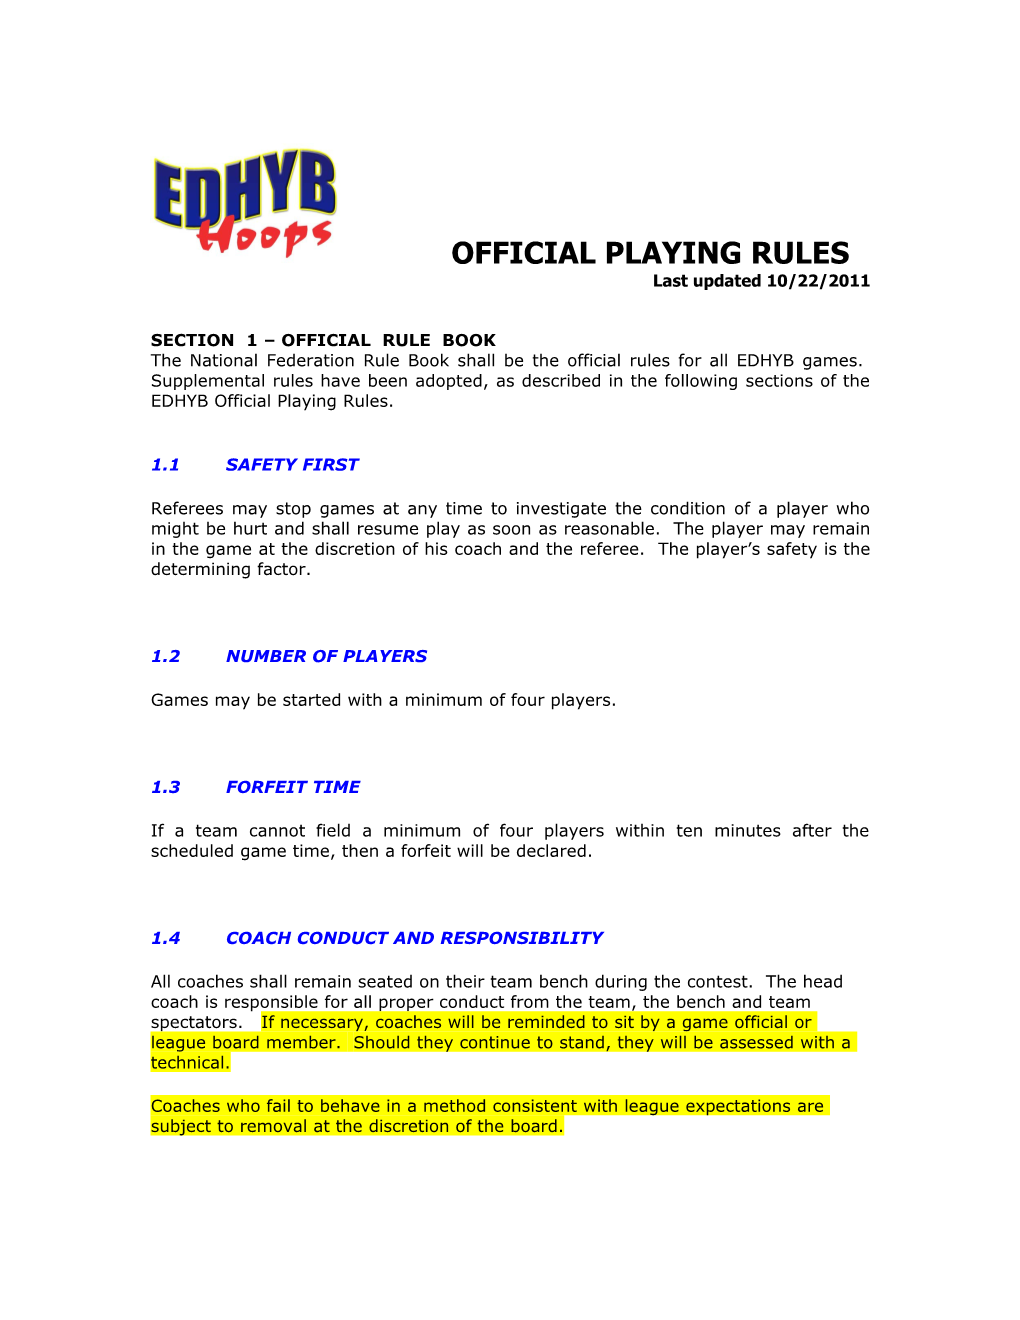 Section 1 Official Rule Book